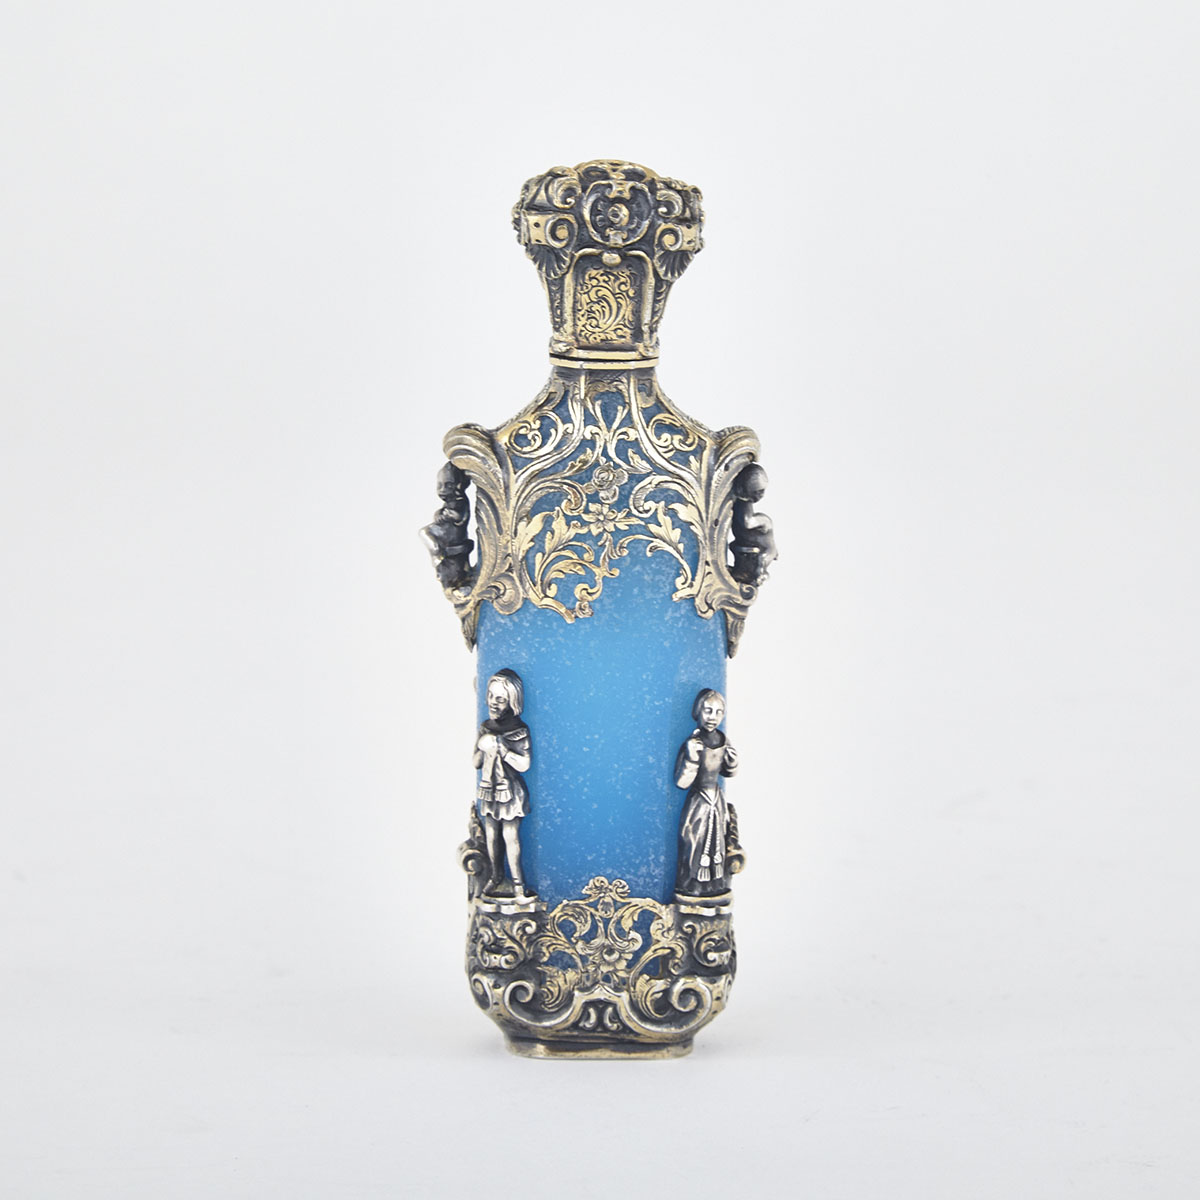 French Silver-Gilt Mounted Opaque Blue Glass Perfume Bottle, mid-19th century